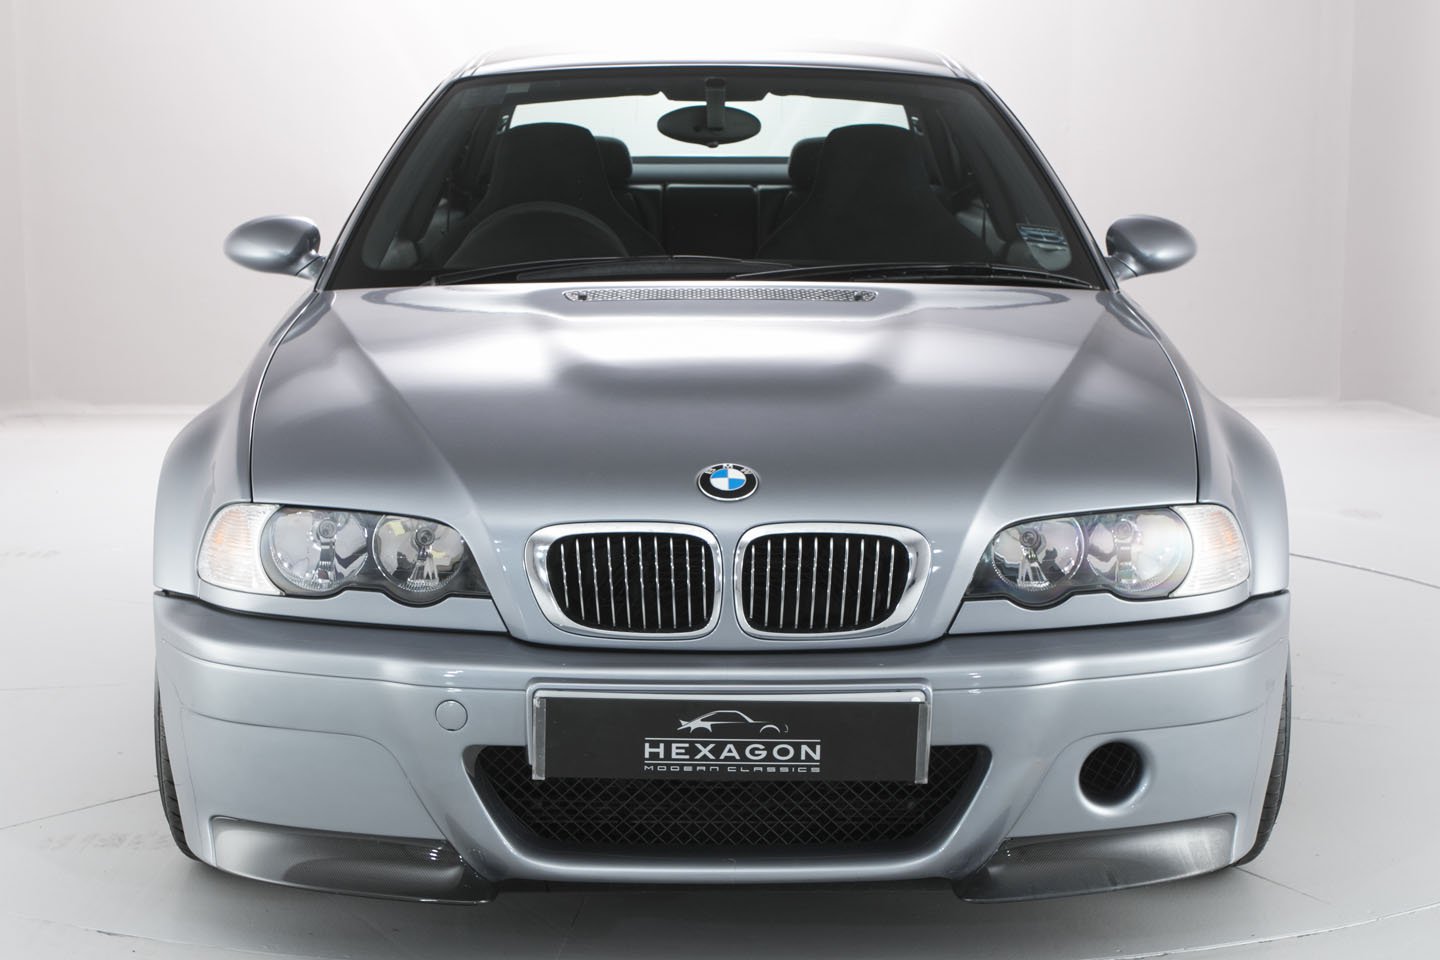 Pristine E46 BMW M3 CLS Is up for Grabs at Hexagon Modern Classics, UK